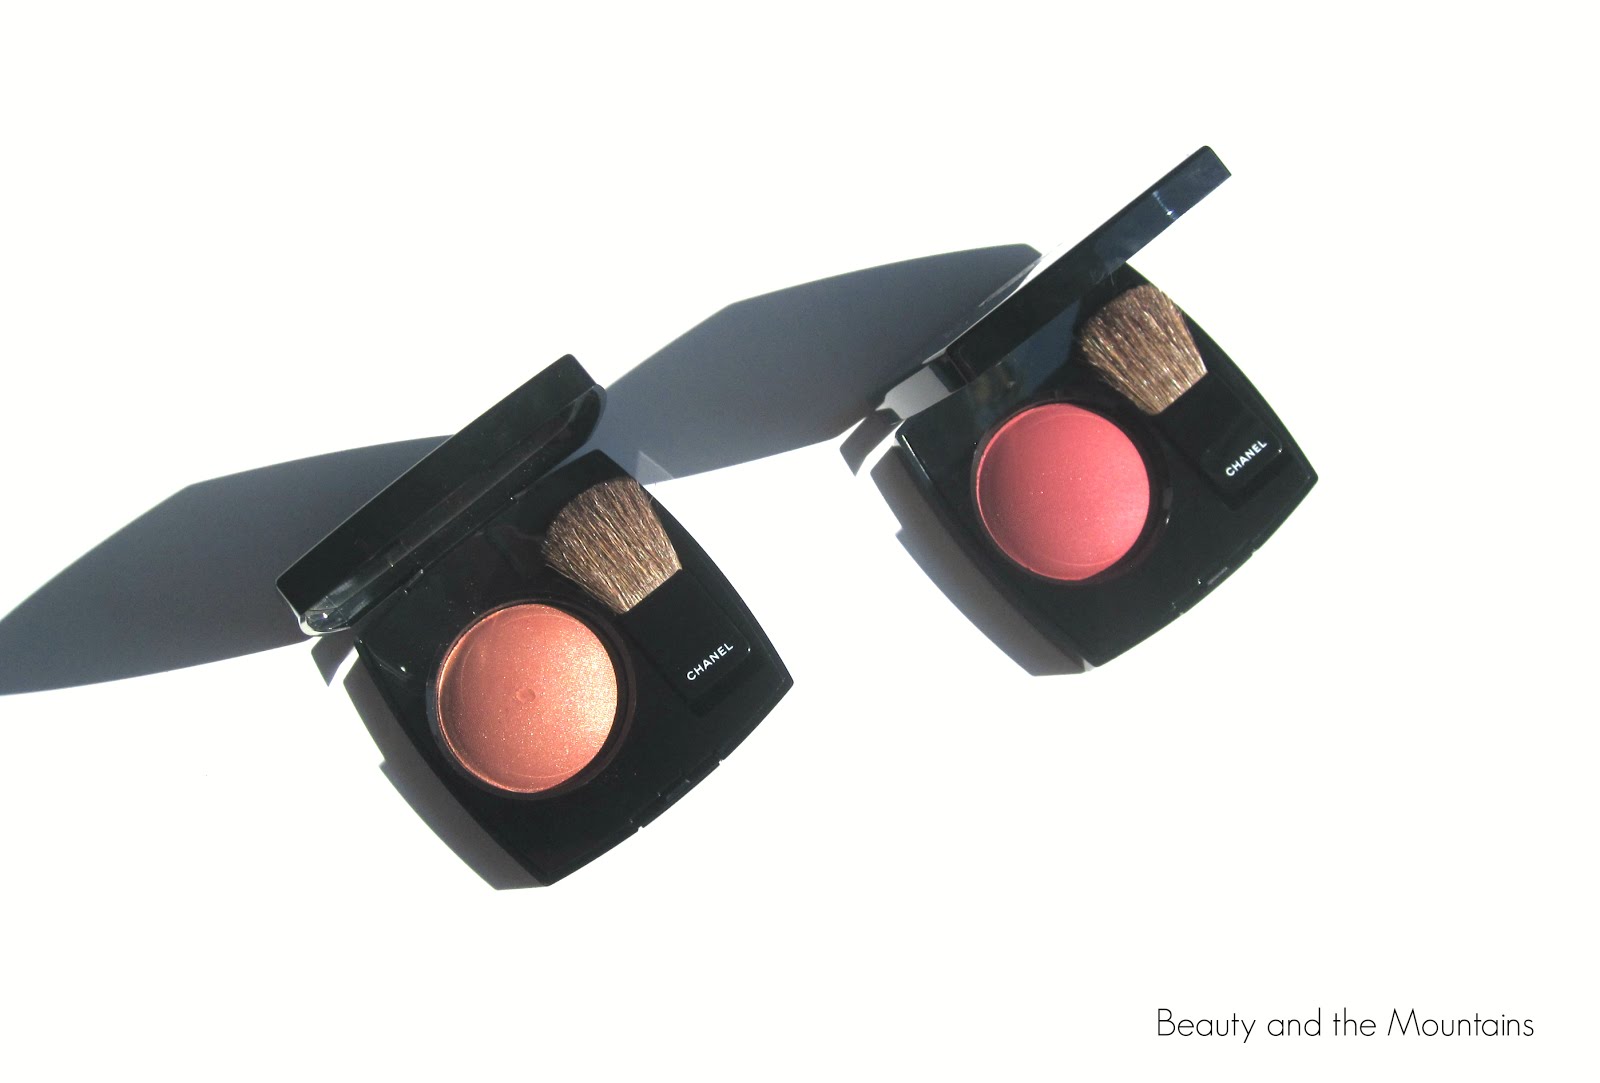 Chanel Les 4 Ombres eyeshadow quads and Joues Contraste blushes … USA vs  The Rest of the World – Sweet Makeup Temptations